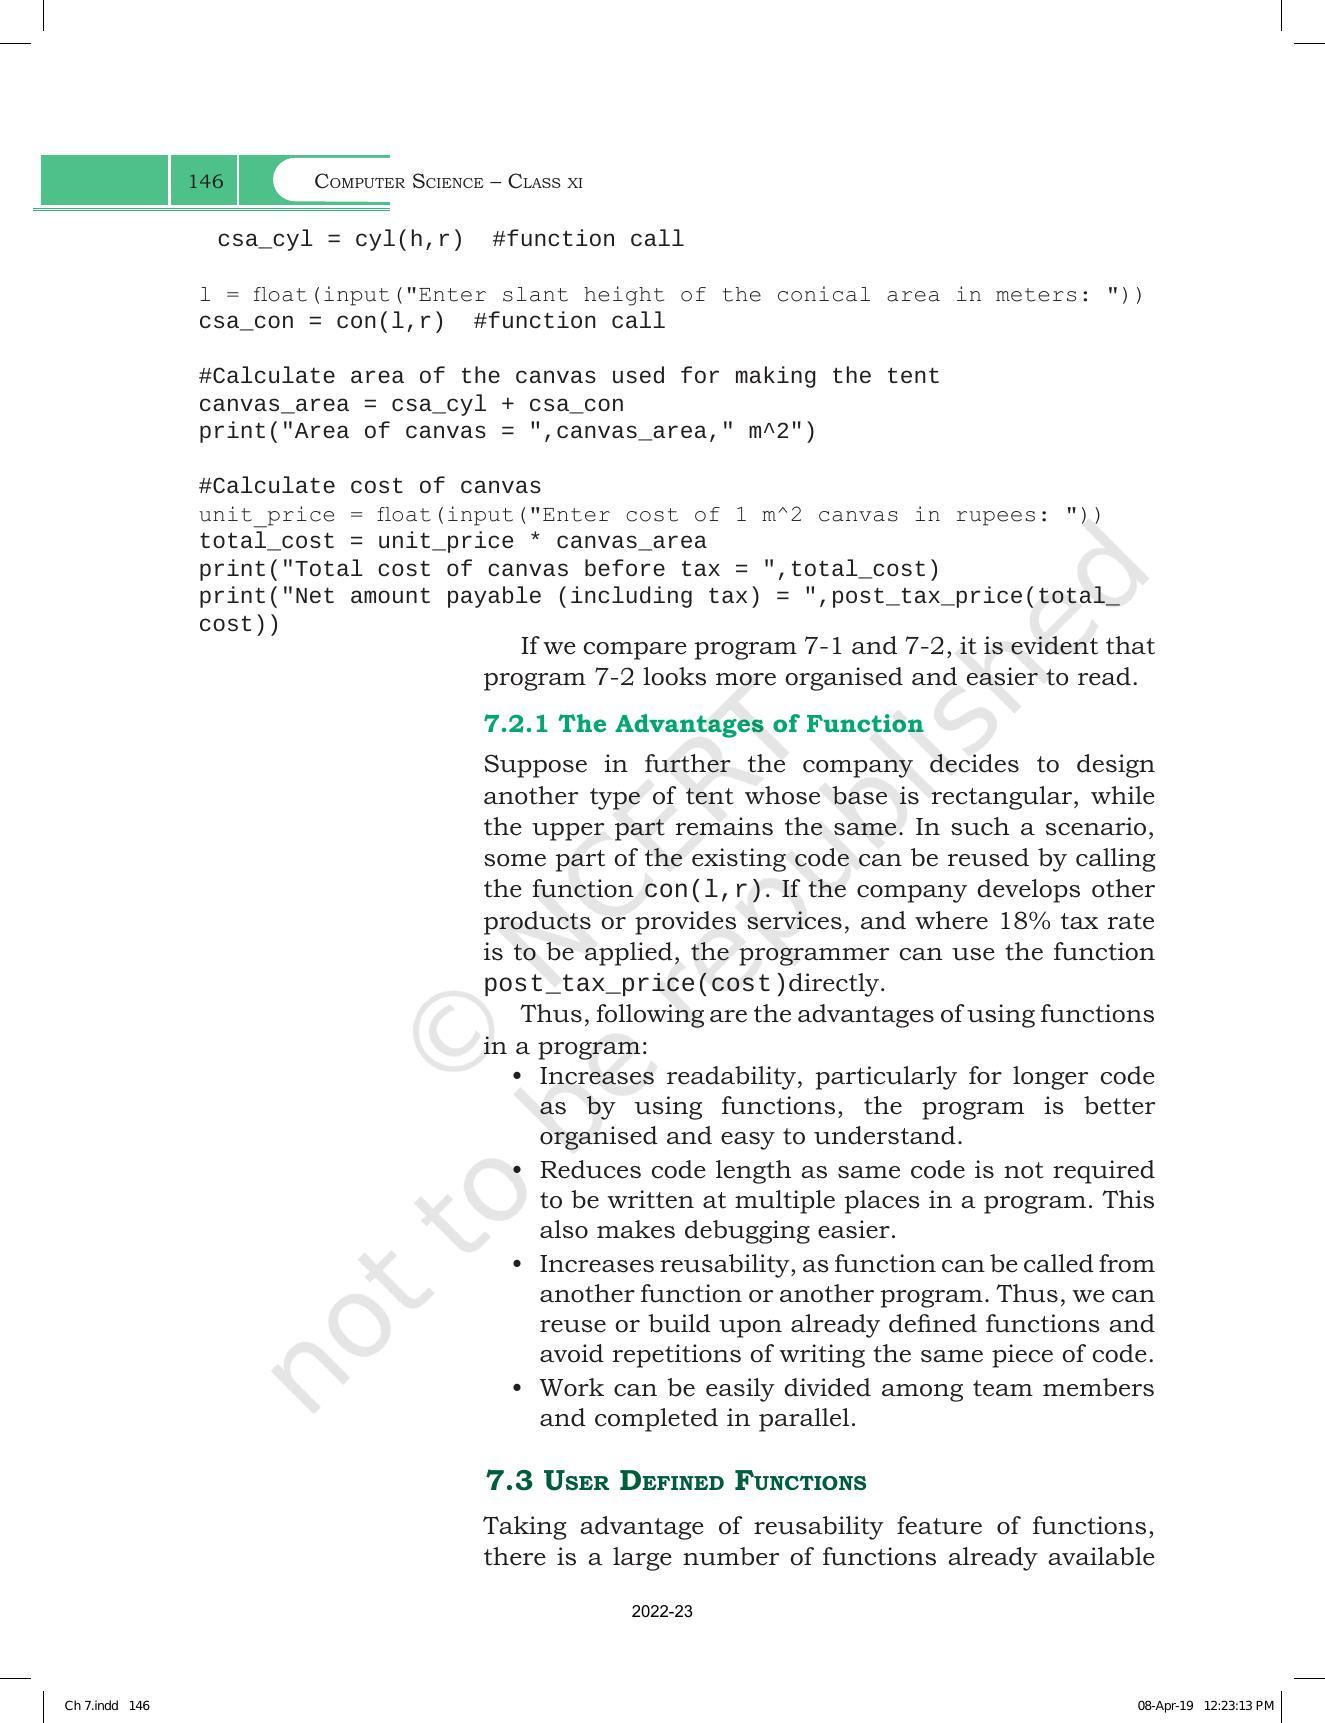 NCERT Book for Class 11 Computer Science Chapter 7 Functions - Page 4